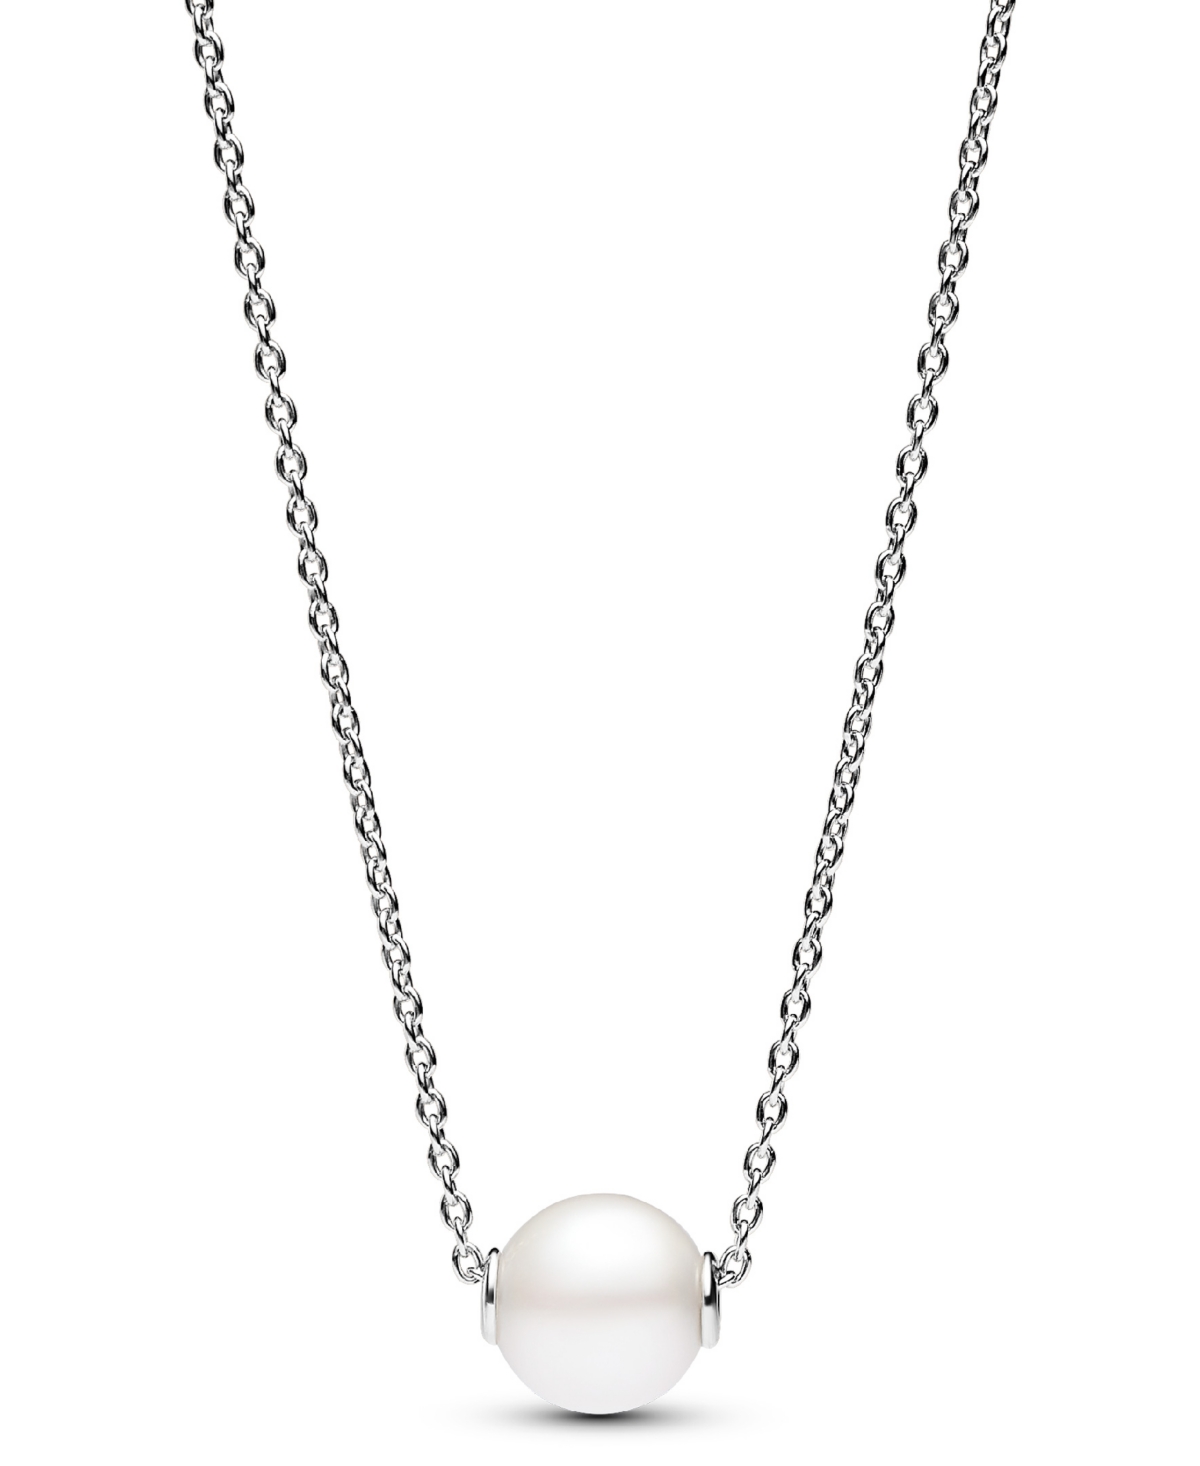 Sterling Silver Sparkling Treated Freshwater Cultured Pearl Collier Necklace - Silver